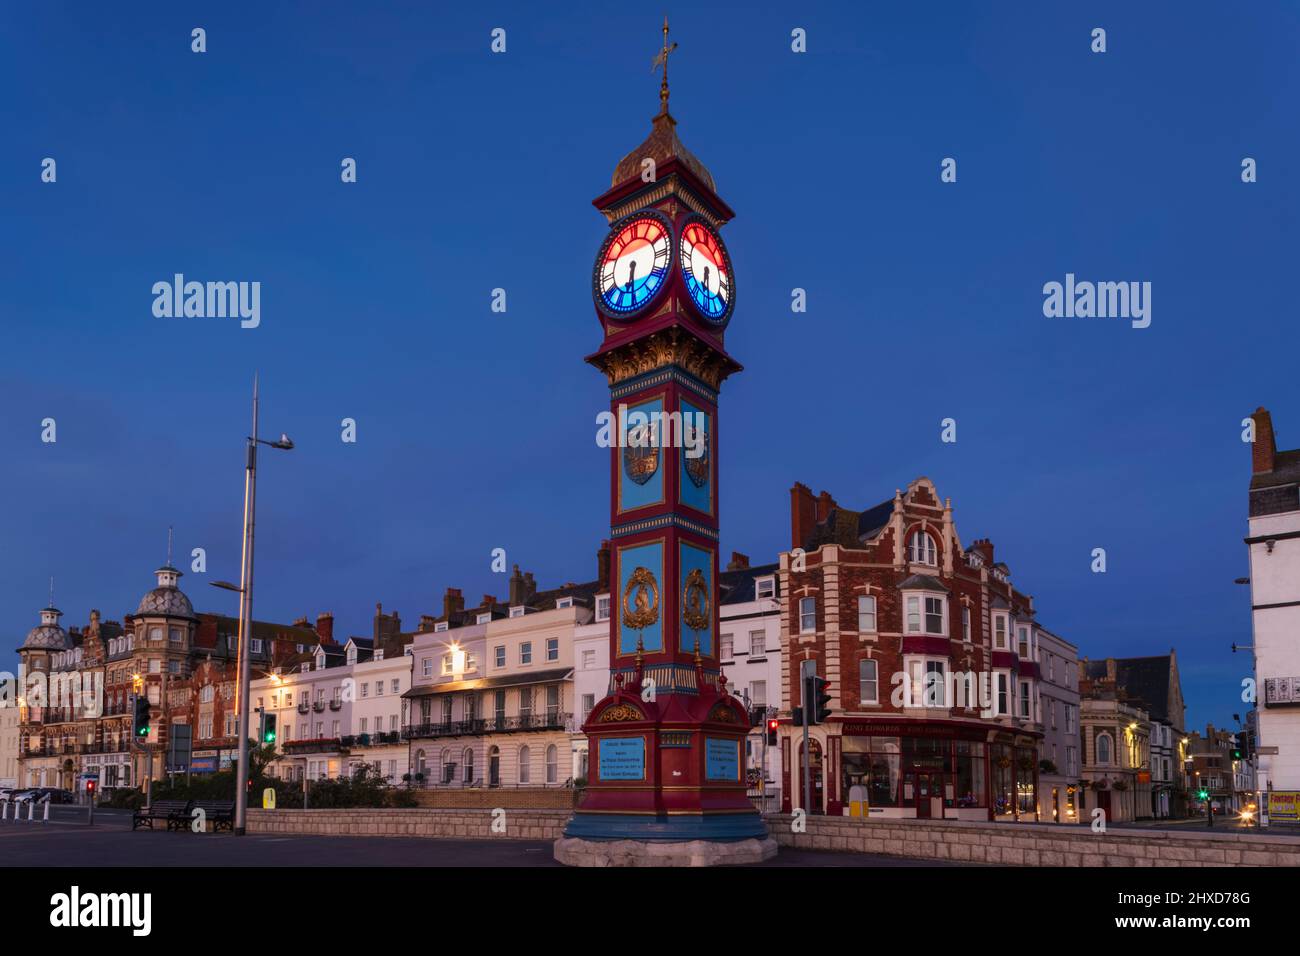 England, Dorset, Weymouth, Weymouth Esplanade, The Jubilee Clock Tower Erected in 1888 to Commemorate The Golden Jubilee of Queen Victoria Stock Photo